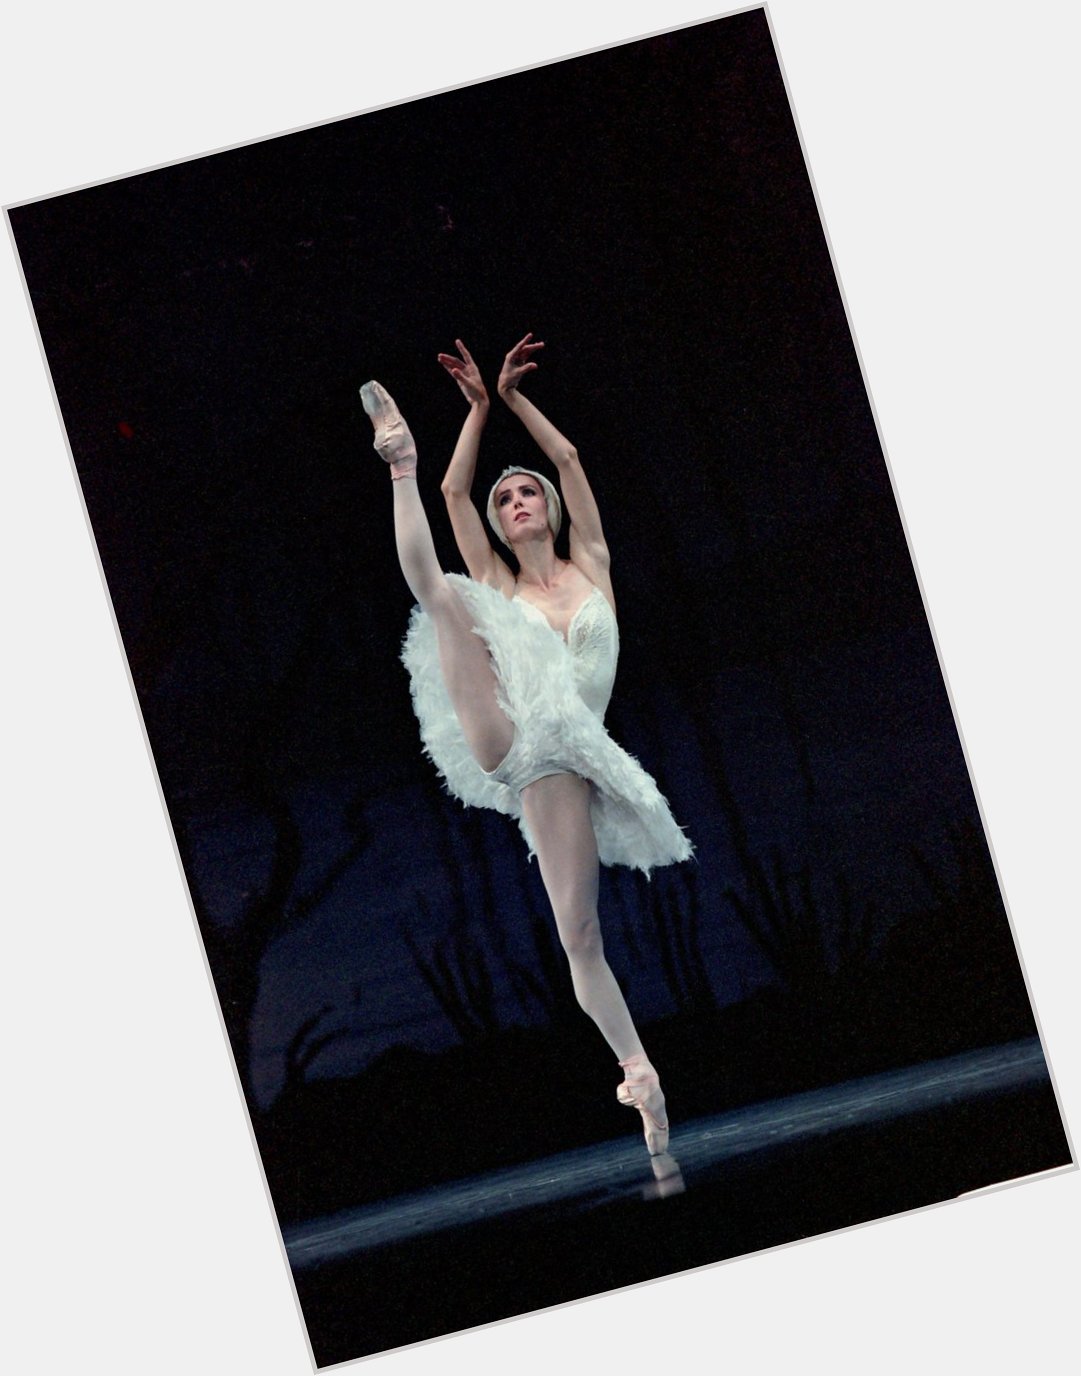 February the 25th is the birthday of the one and only Sylvie Guillem. Happy Birthday! 